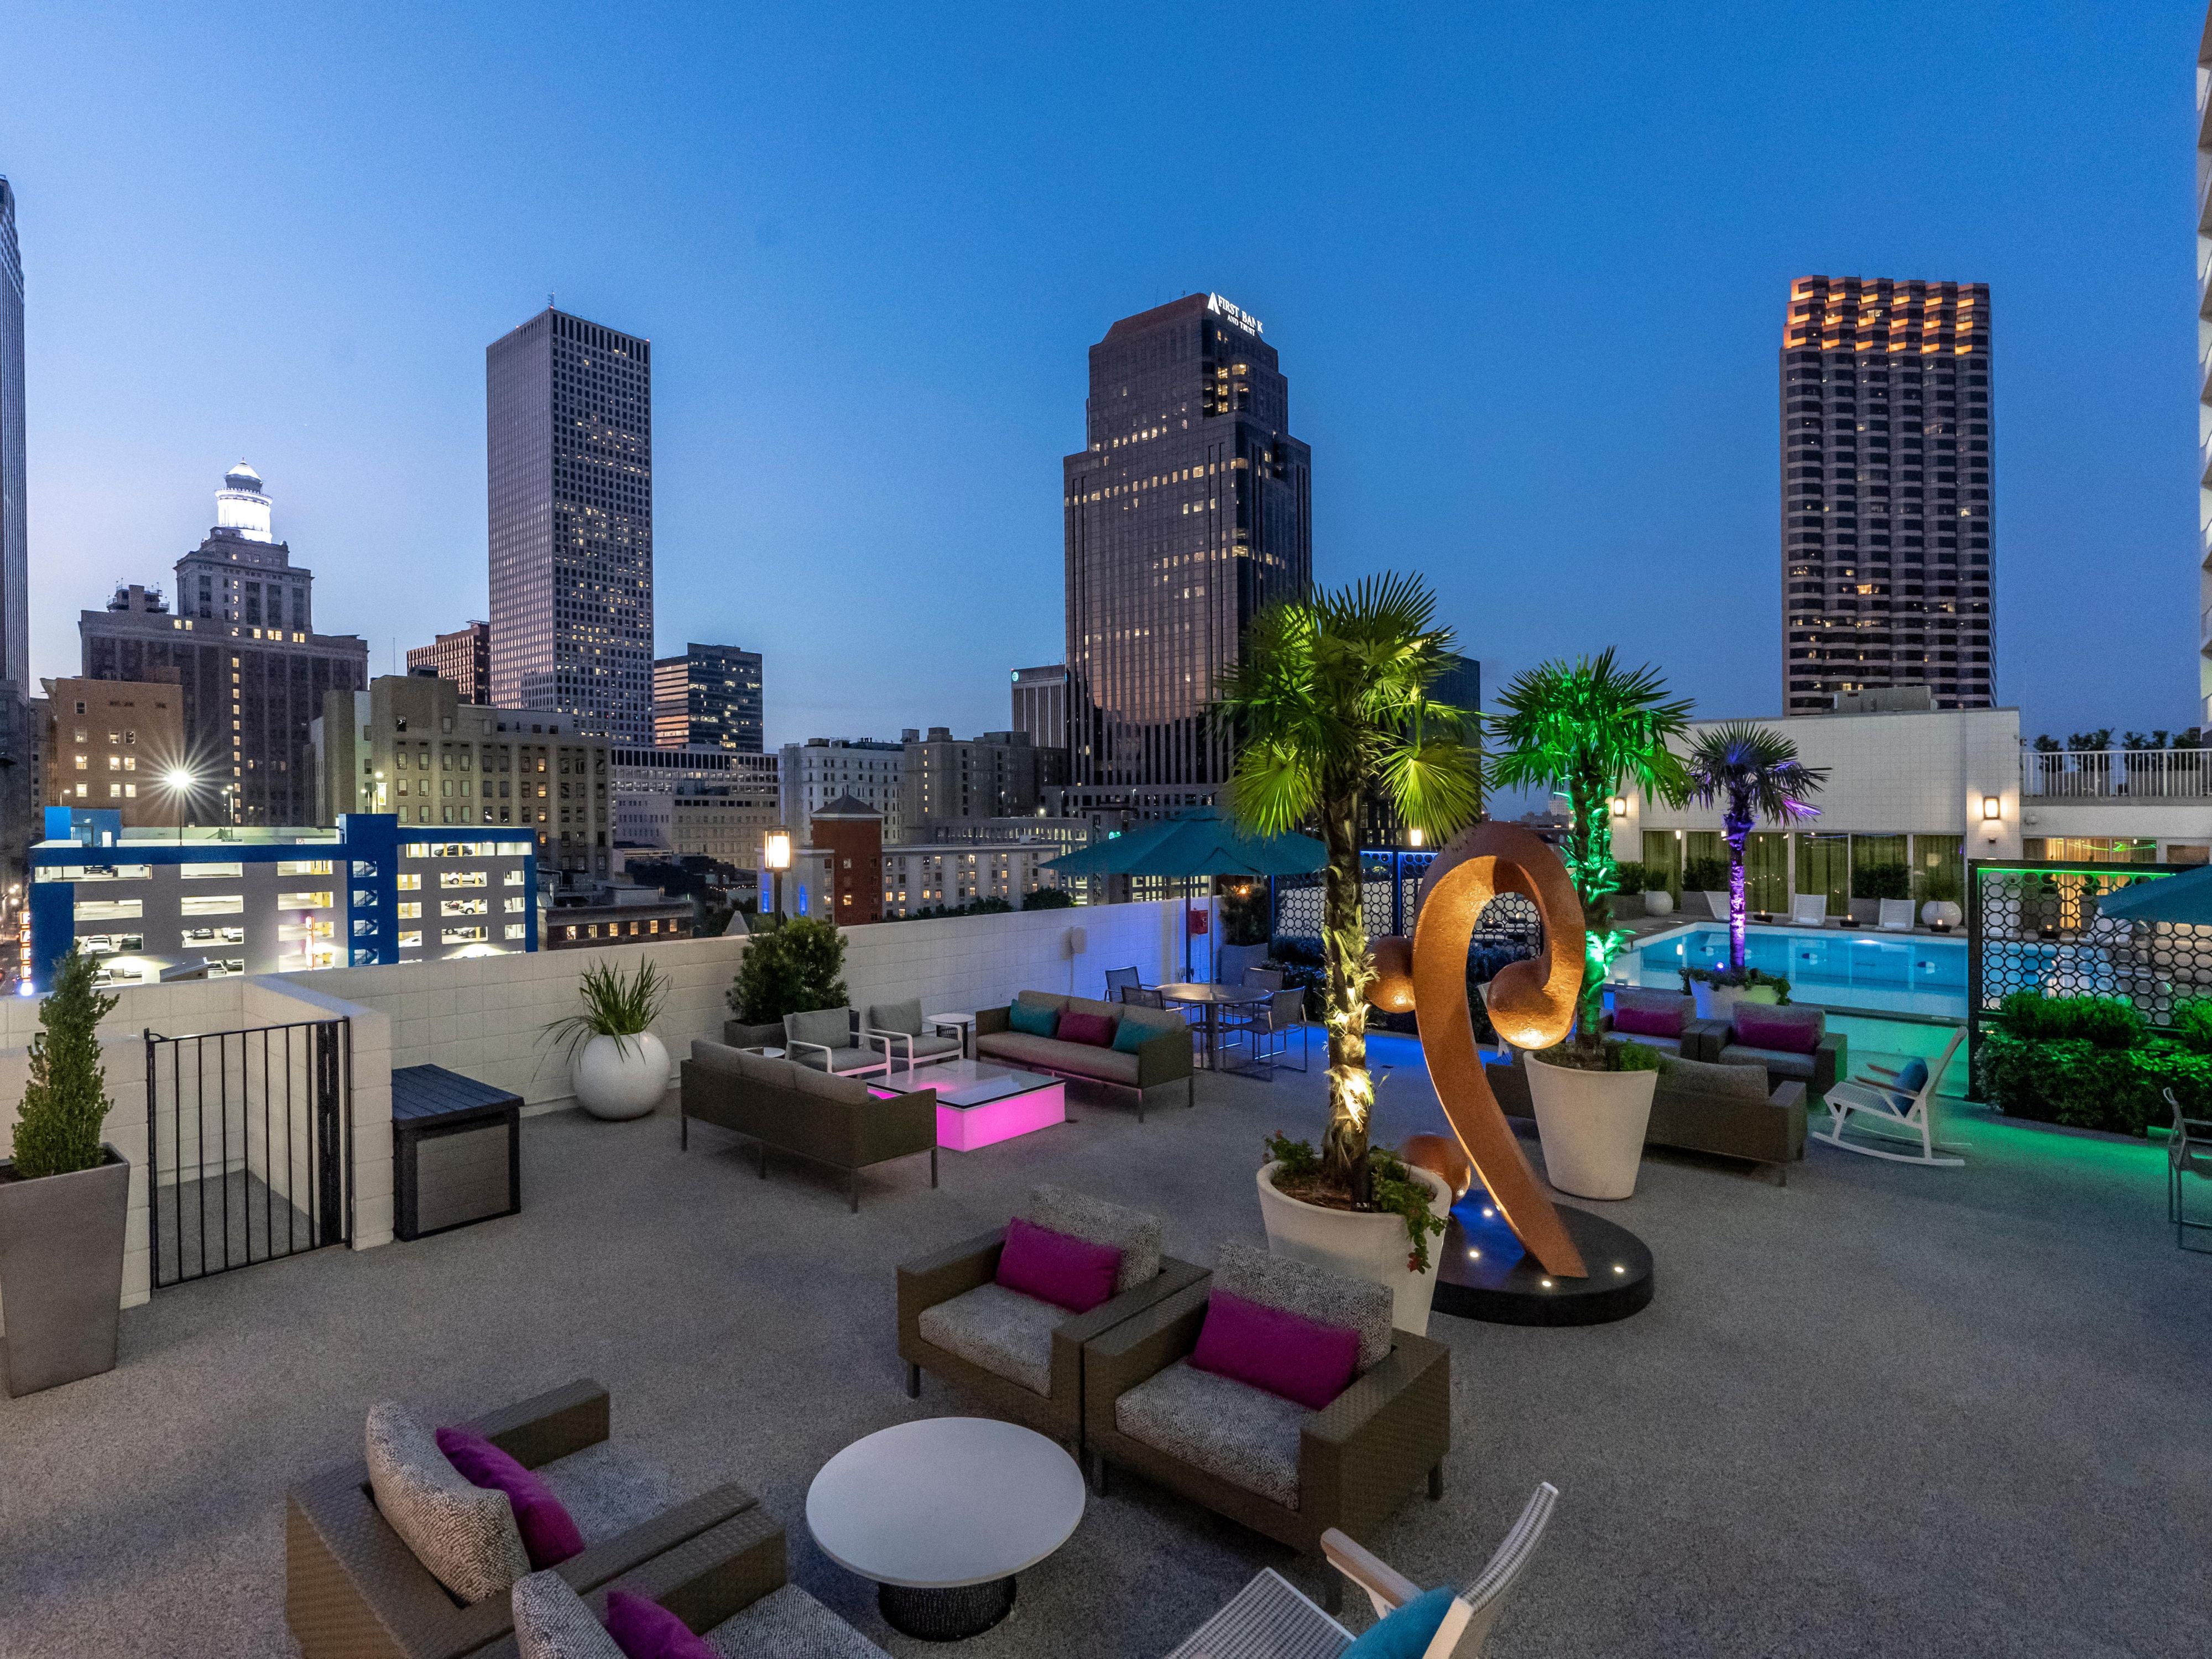 Before you head to the French Quarter, enjoy a drink while overlooking the stunning skyline of downtown New Orleans. Our spacious rooftop deck has plenty of seating and our heated pool is perfect year round for anyone ready to take a dip!